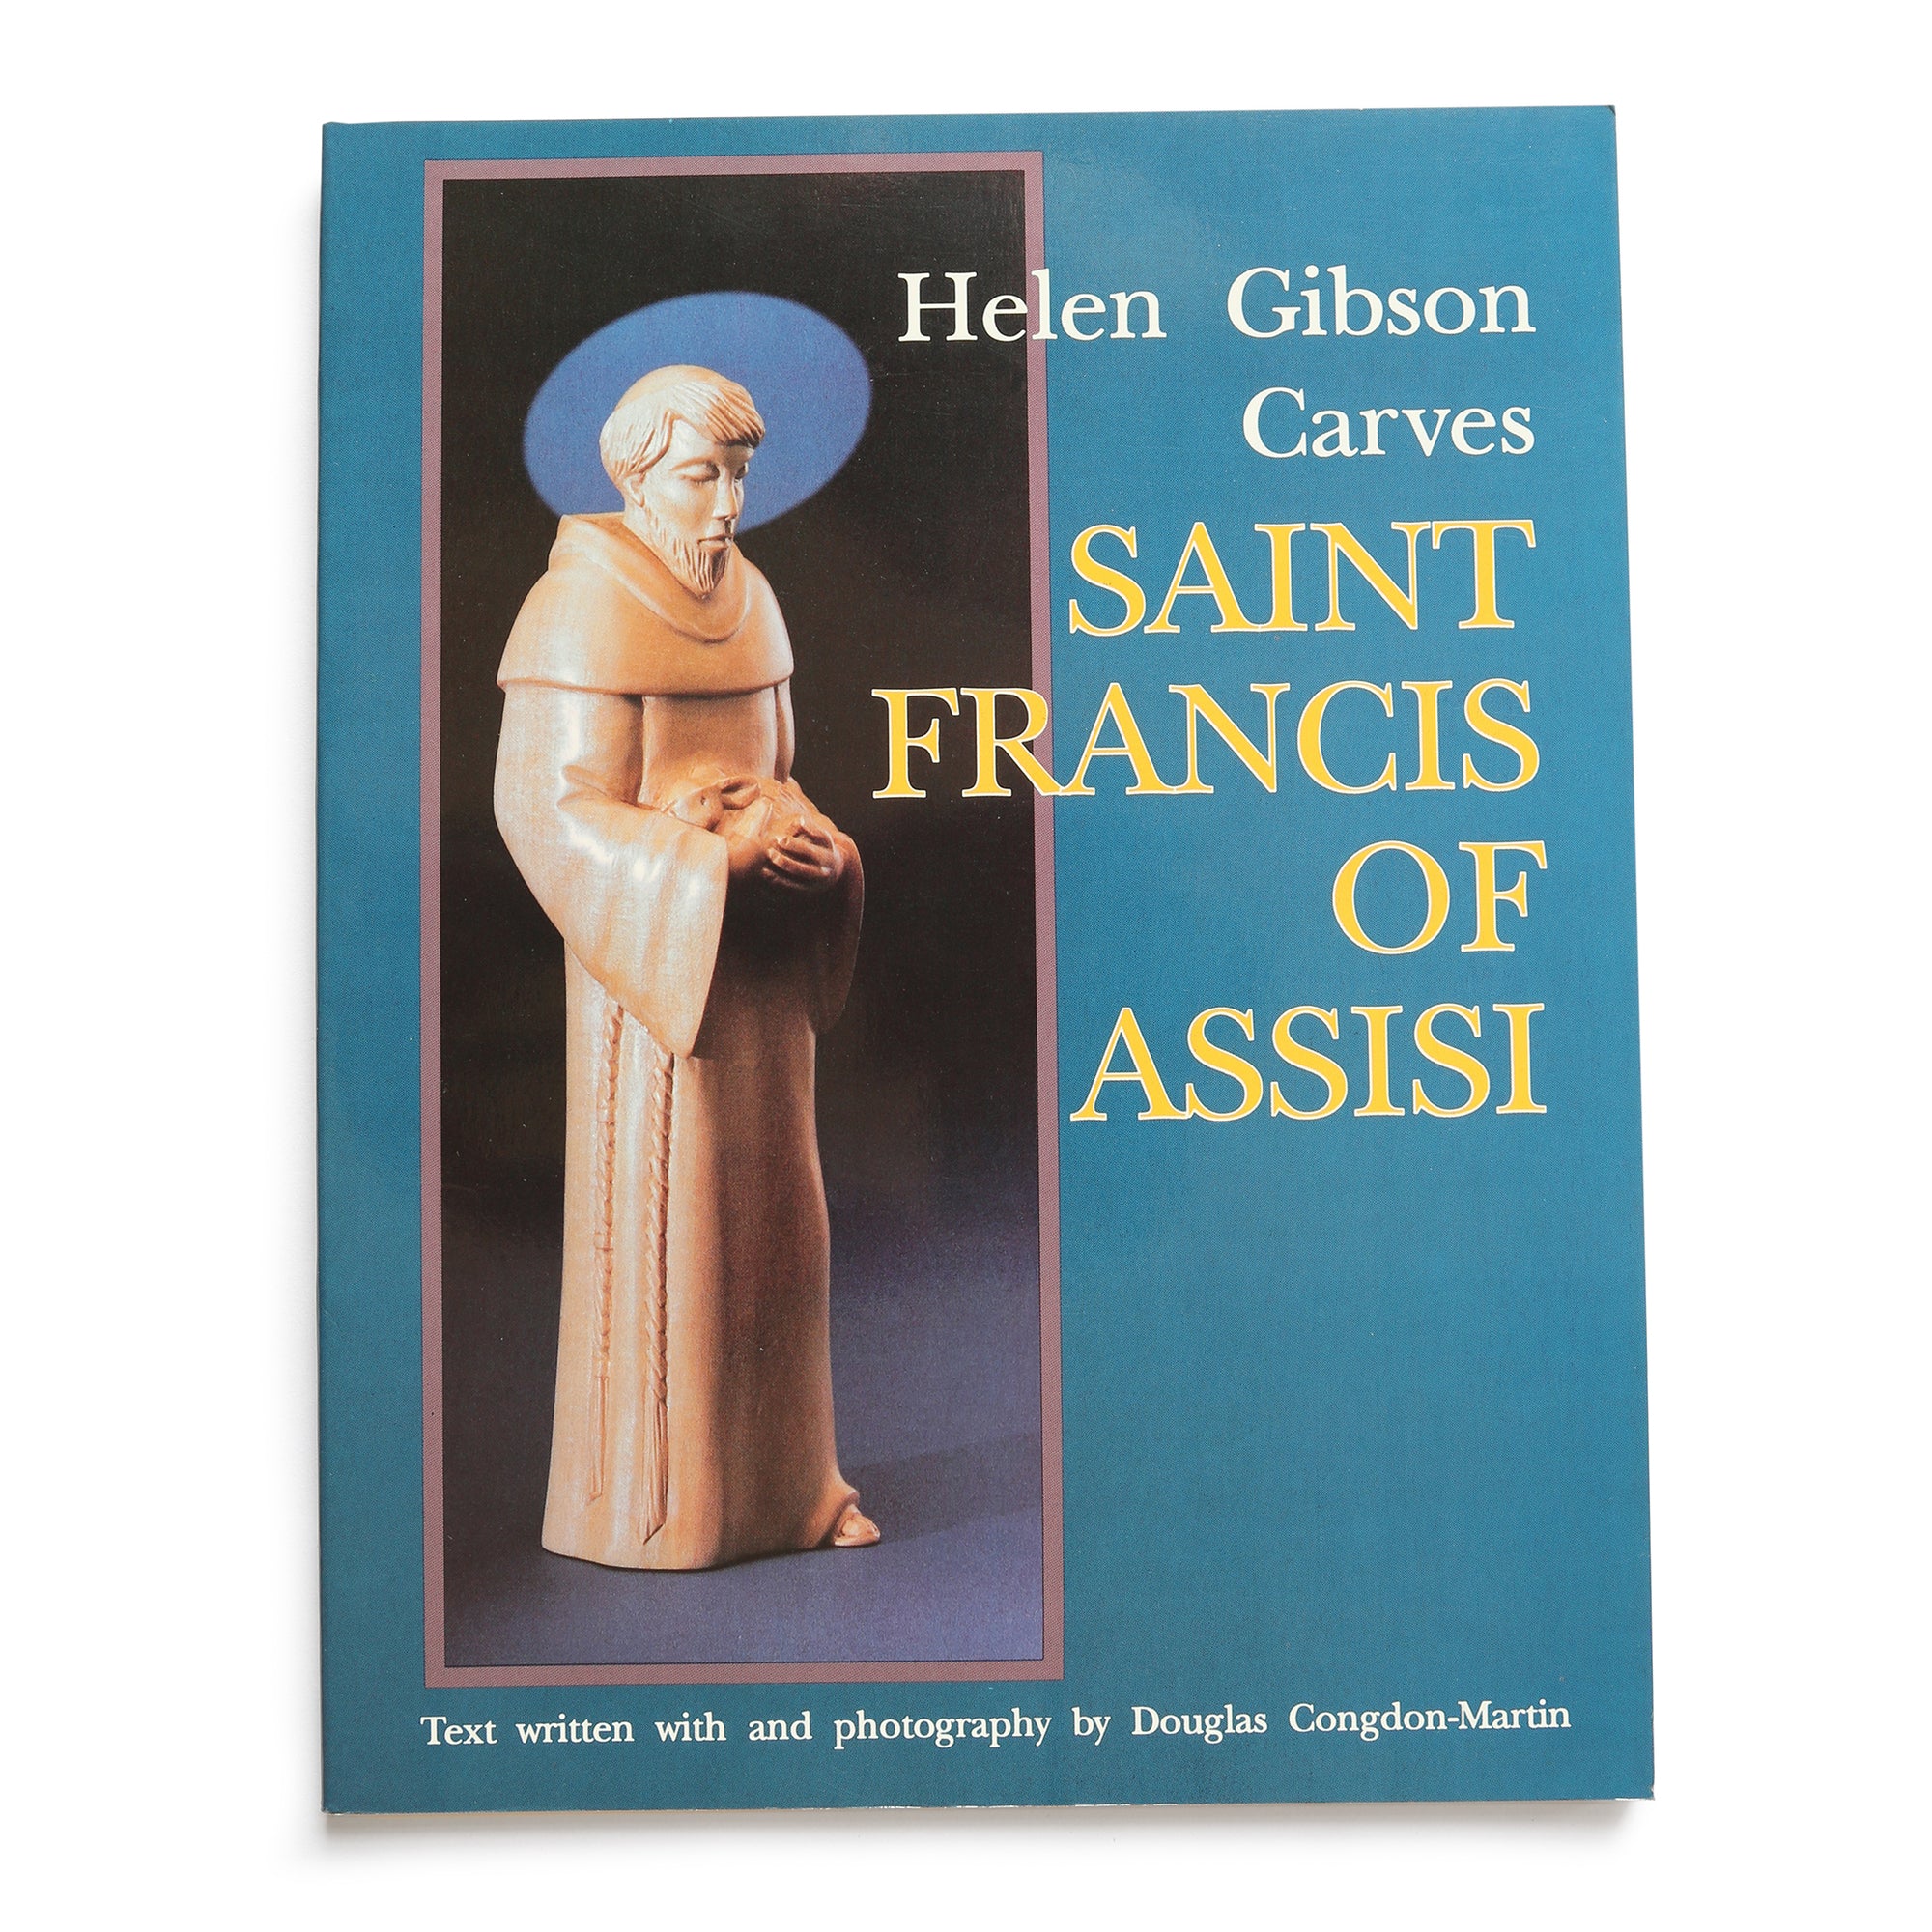 Helen Gibson Carves Saint Francis of Assisi